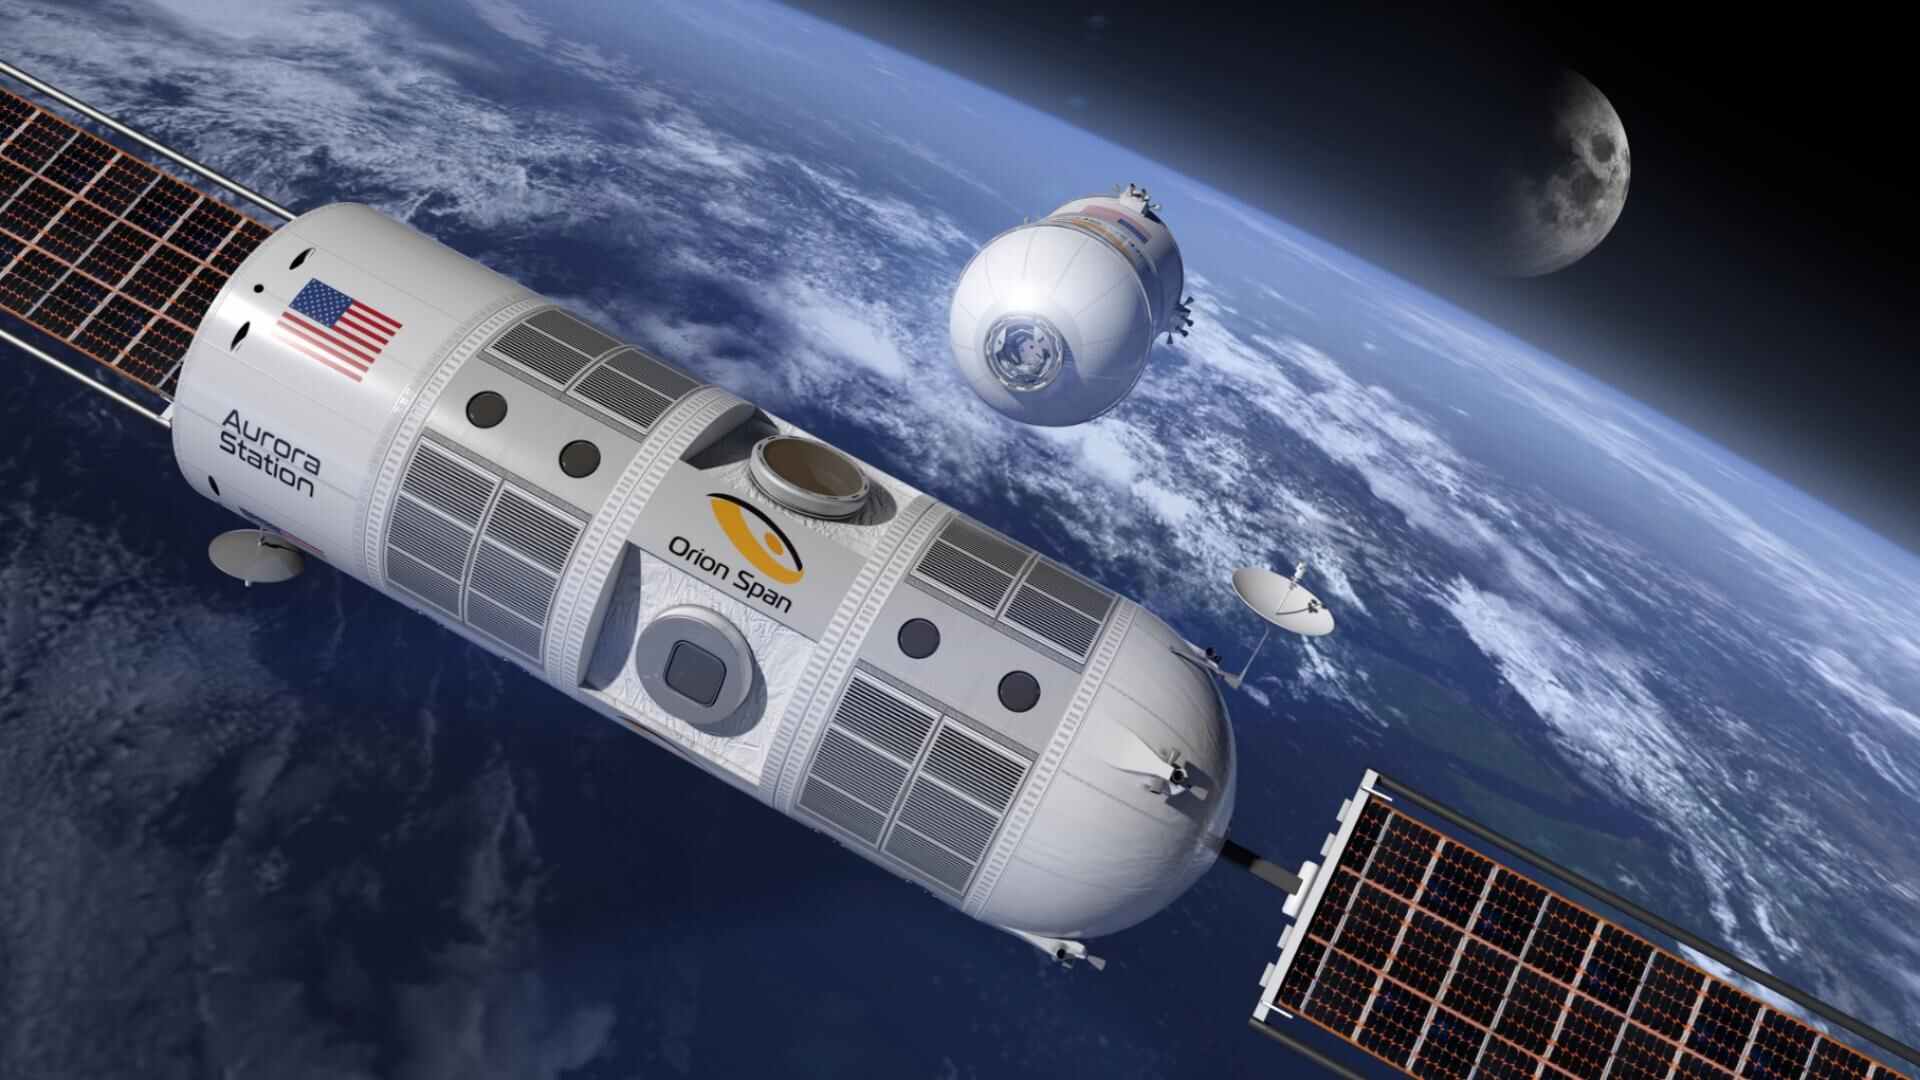 The first space hotel in the world for millions only - The first space hotel in the world for millions only